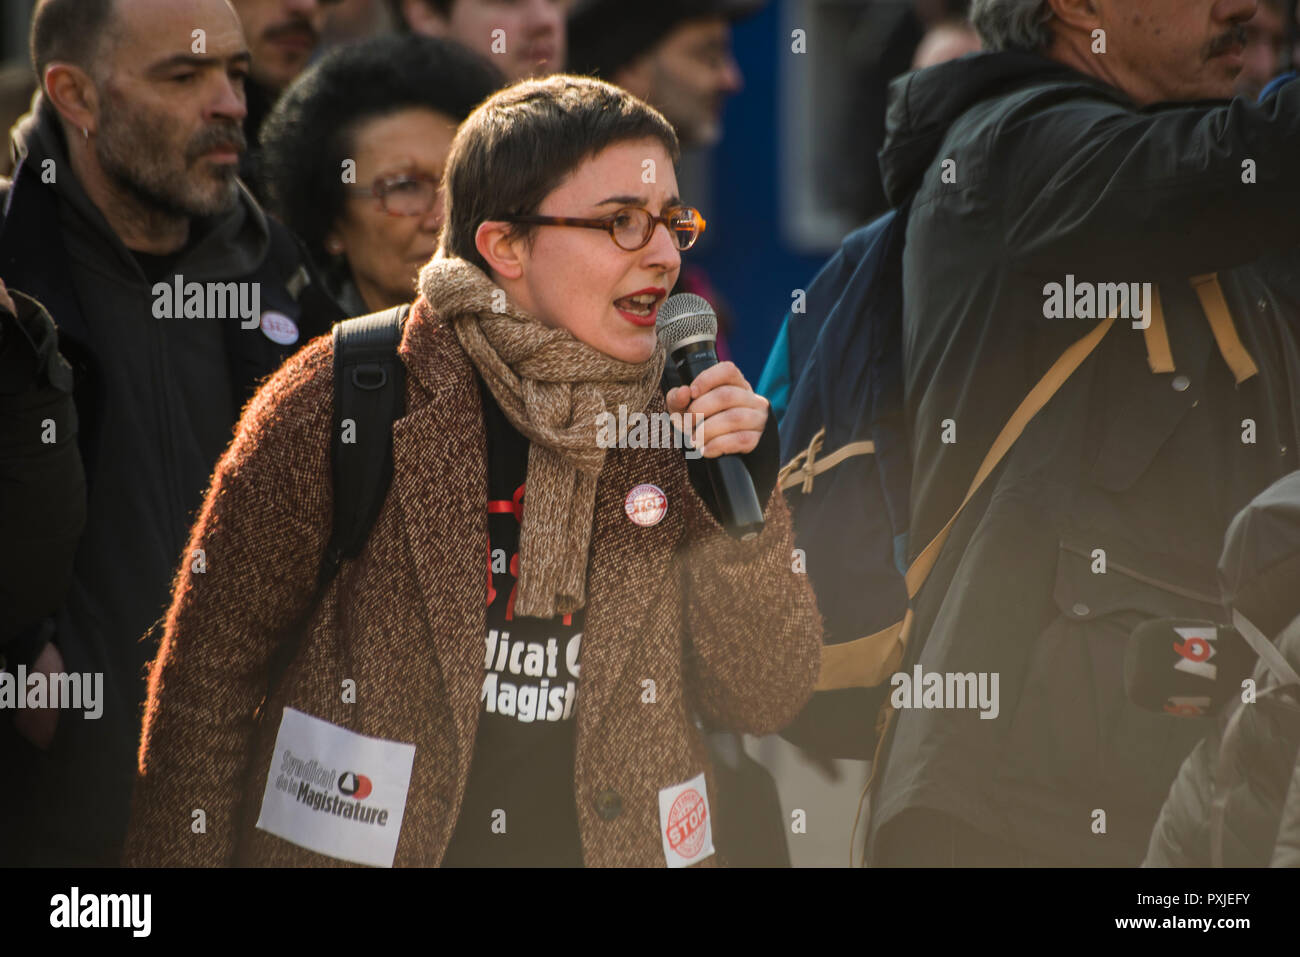 Paris, France. Laurence Blisson speaking during street protest Stock Photo